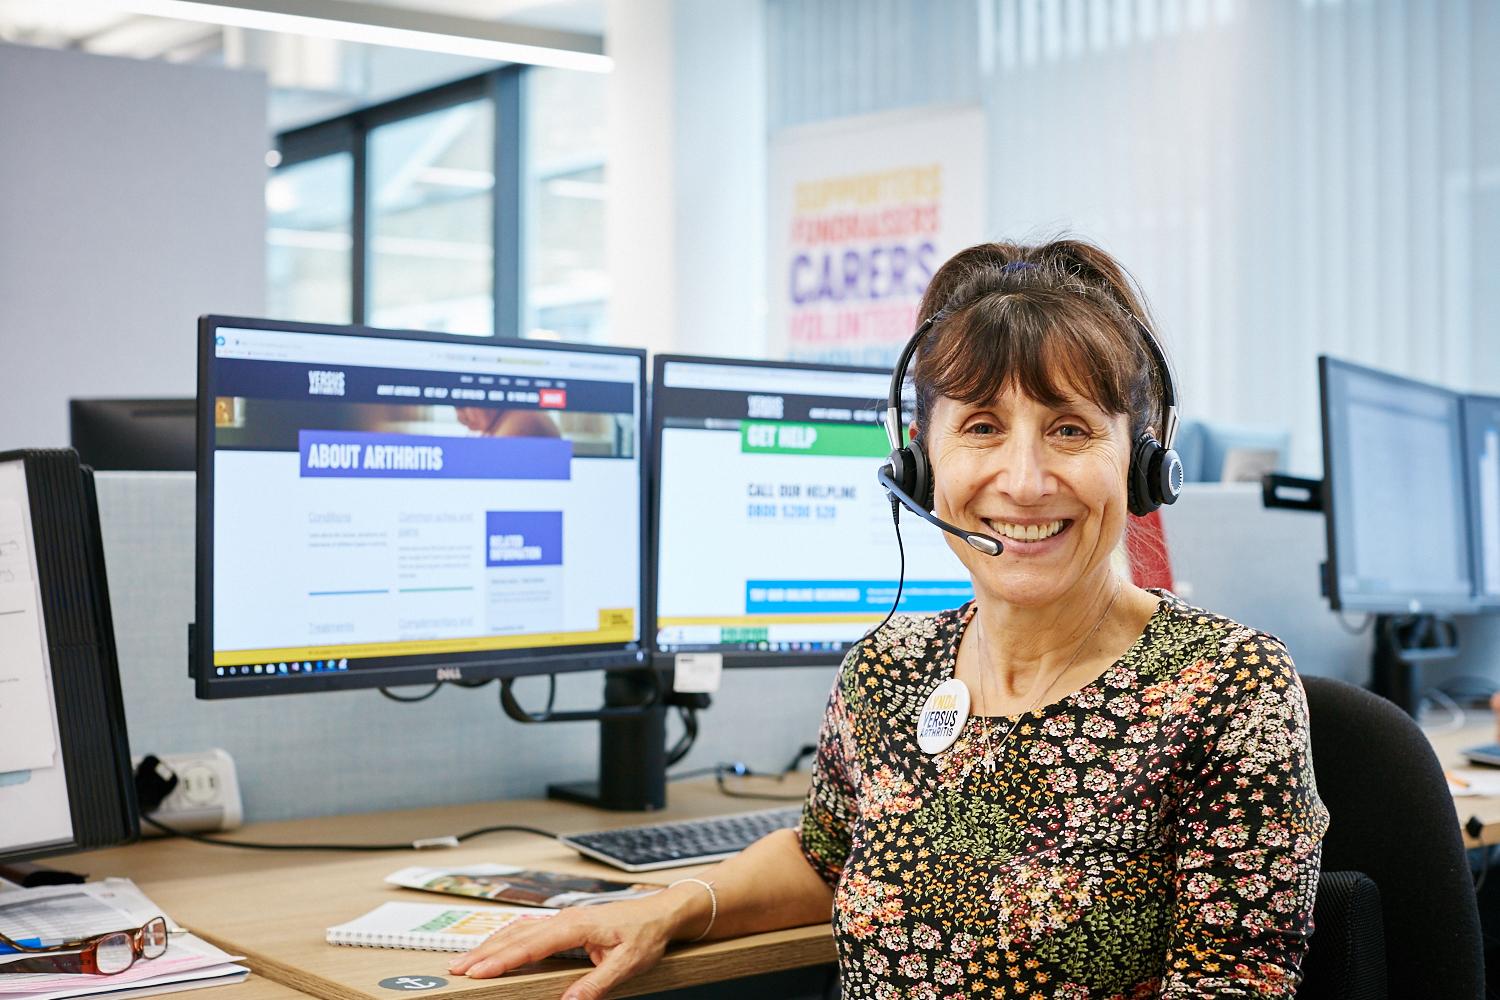 Jayne, a Versus Arthritis Helpline advisor, is sitting at her desk, smiling to the camera. She has a headset on and you can see the Versus Arthritis website on her monitor behind her.